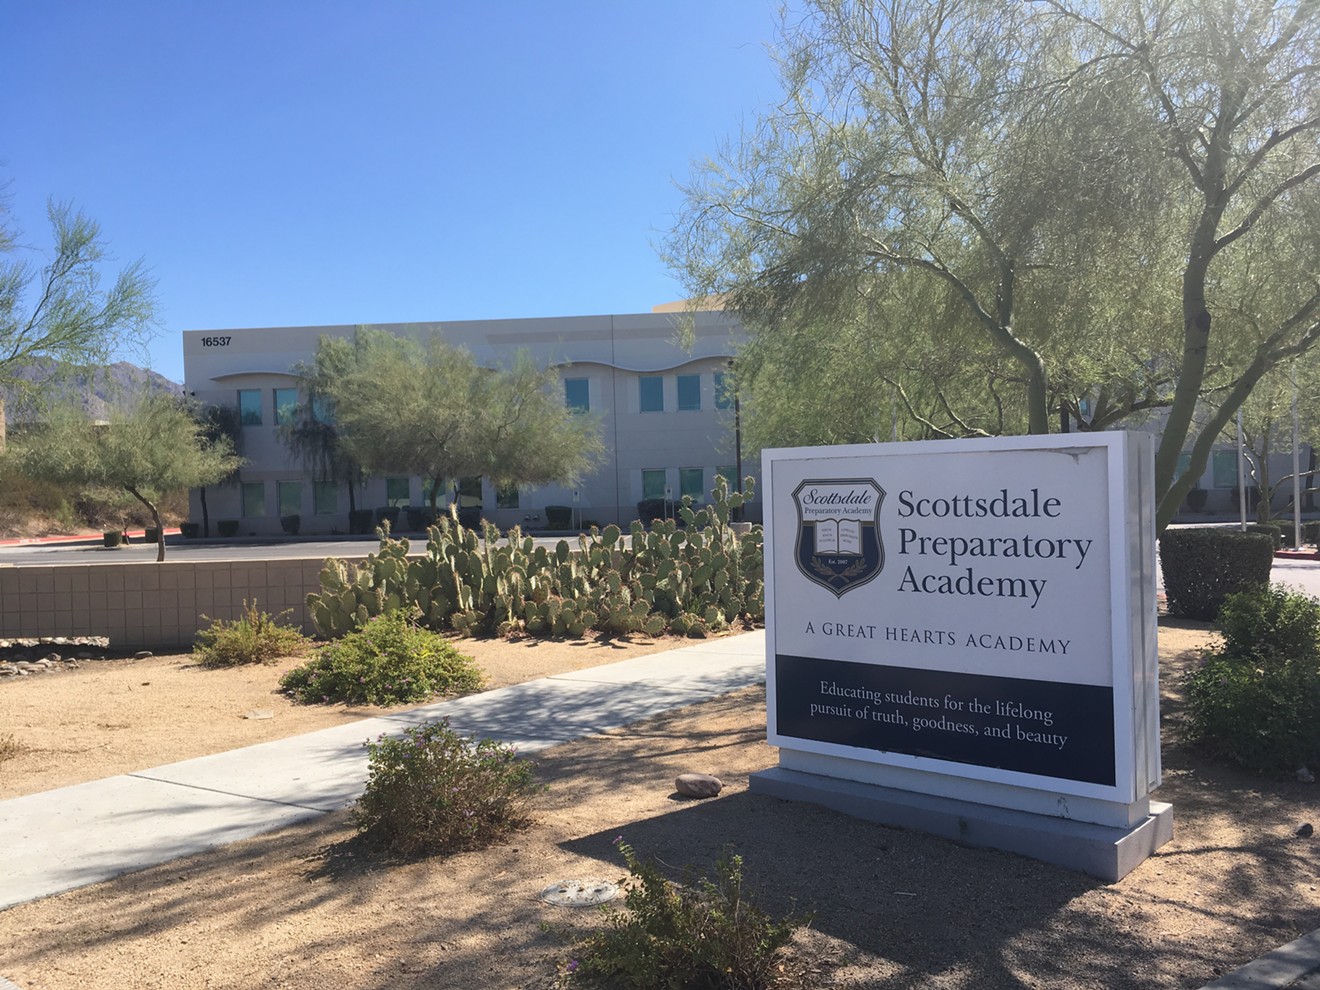 According to advocates, Great Hearts Academies, a network of 28 schools across Arizona and Texas, is abandoning a discriminatory handbook policy that barred transgender students from accessing facilities and using pronouns that correspond to their gender identity.